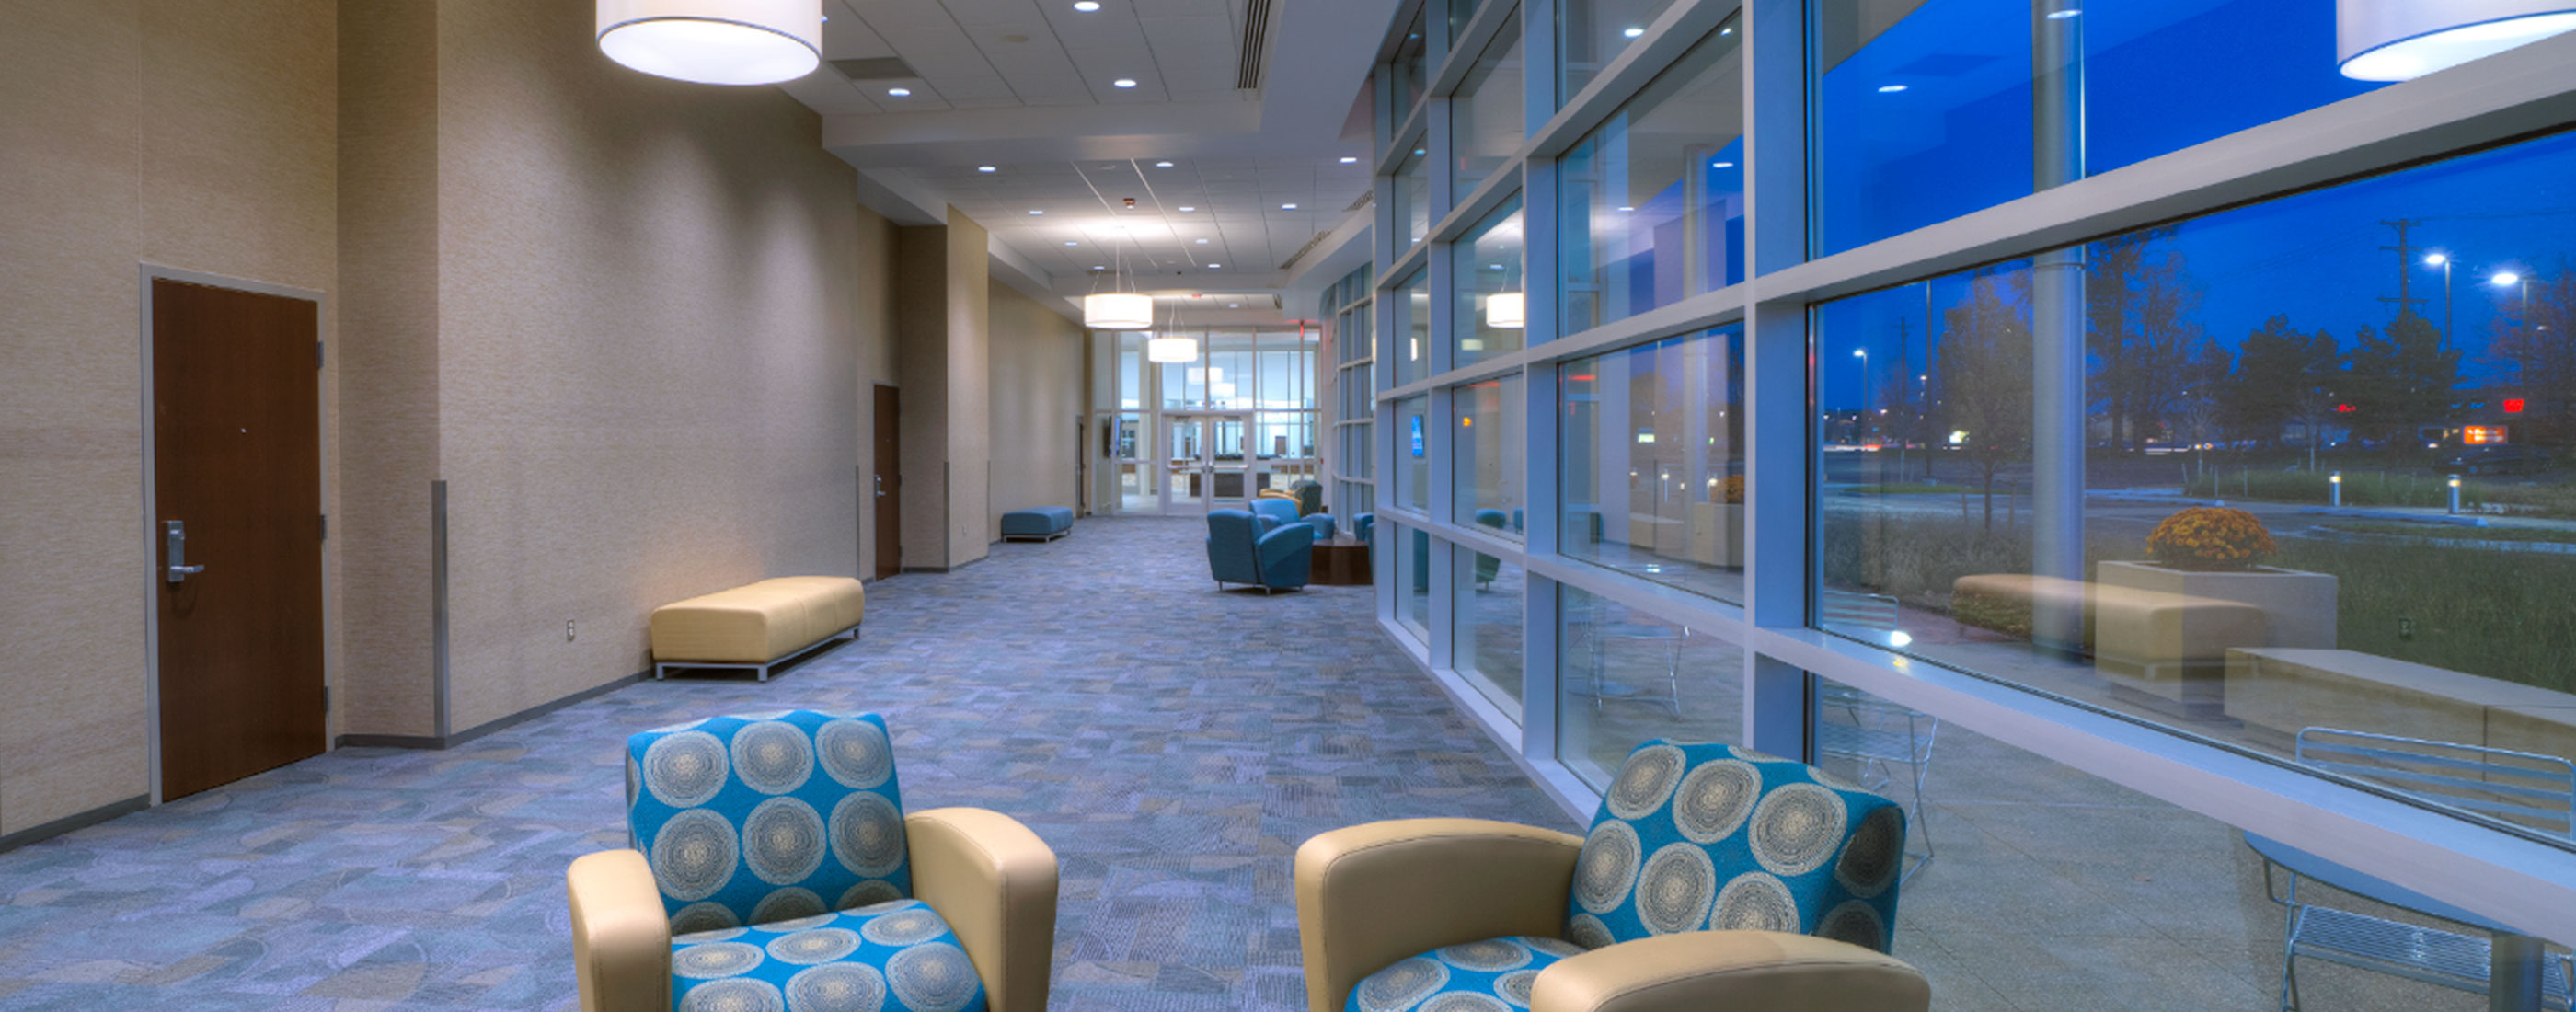 A modern and vibrant design in lobby welcomes citizens into Westland, Michigan’s City Hall, designed by OHM Advisors.